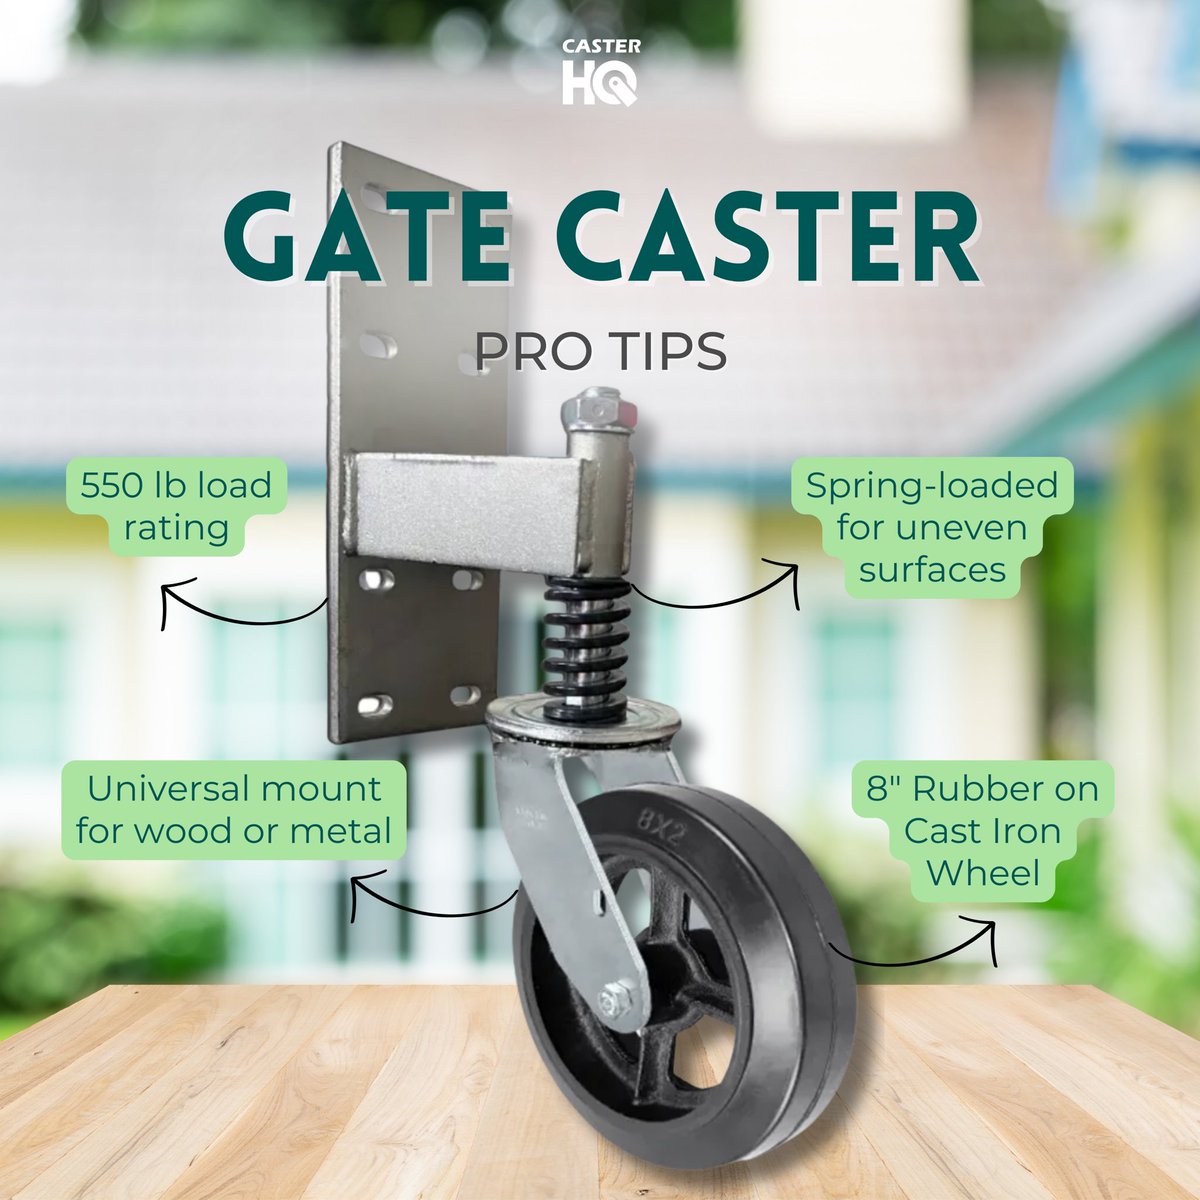 ⭐️ Pro Tip for Easy Installation: When installing your gate caster, attach it to the lowest point of your application. This trick allows the spring to naturally compress as the caster moves up, resulting in a smoother and hassle-free operation. Our heavy duty 8' spring-loaded